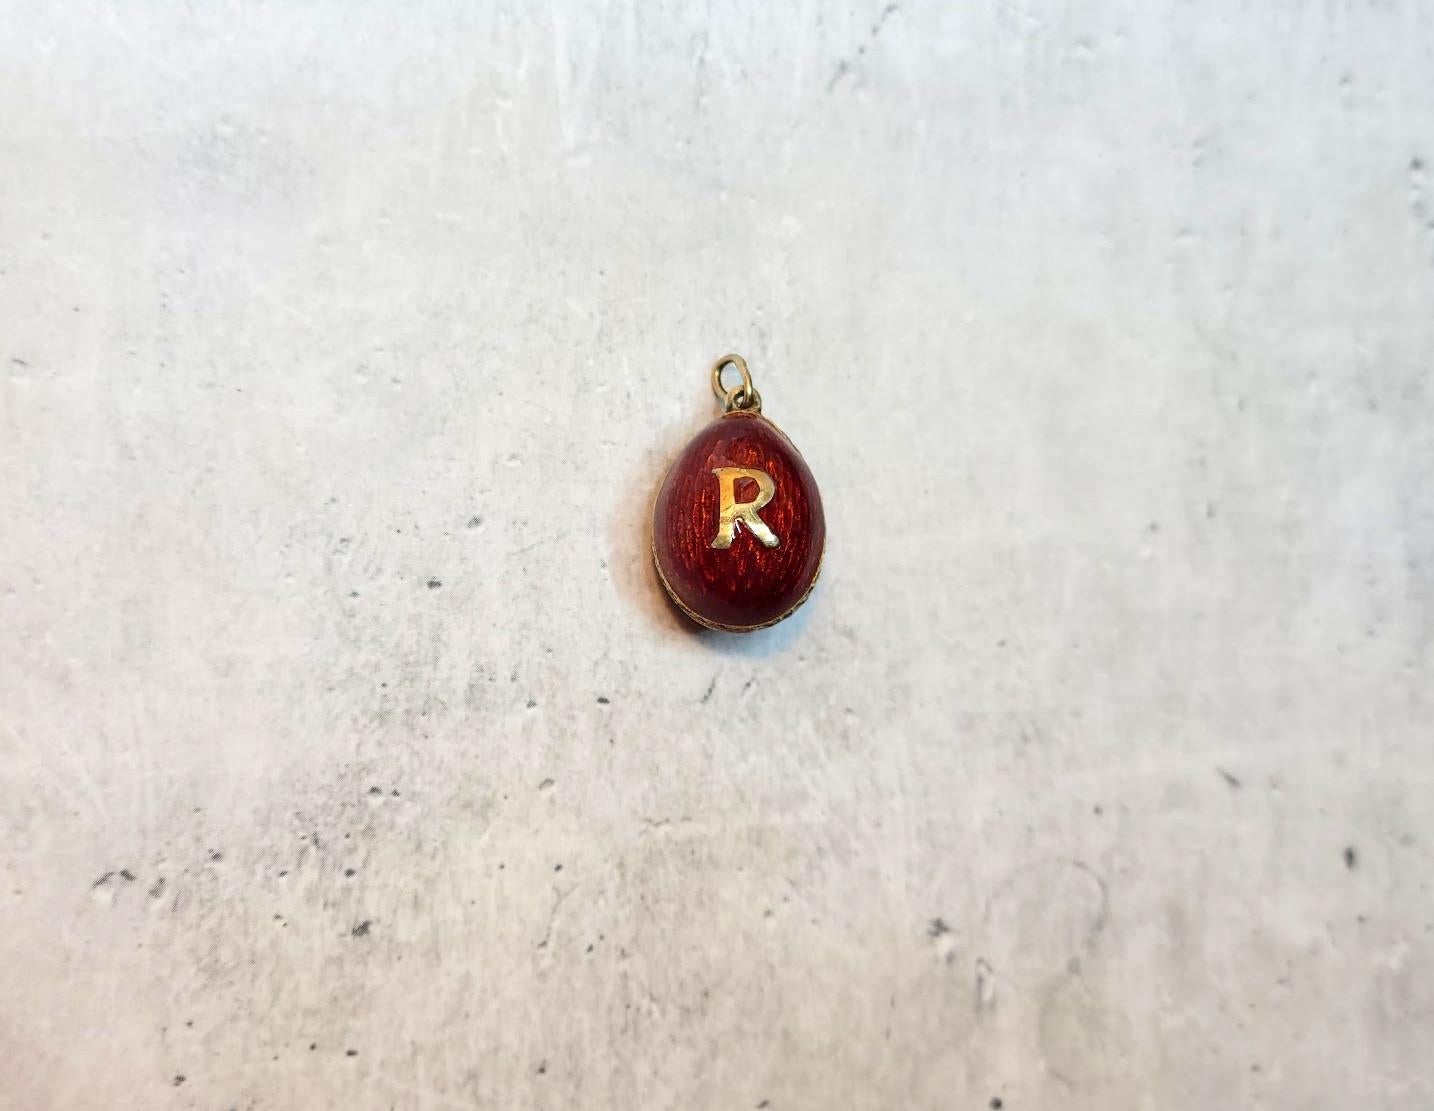 Presenting a stunning pendant designed in the shape of a Russian Imperial gilt silver and enamel egg. The body of the egg is enameled in a deep, beautiful red guilloche enamel. The repeating patterns of the enamel look like hundreds of sun rays